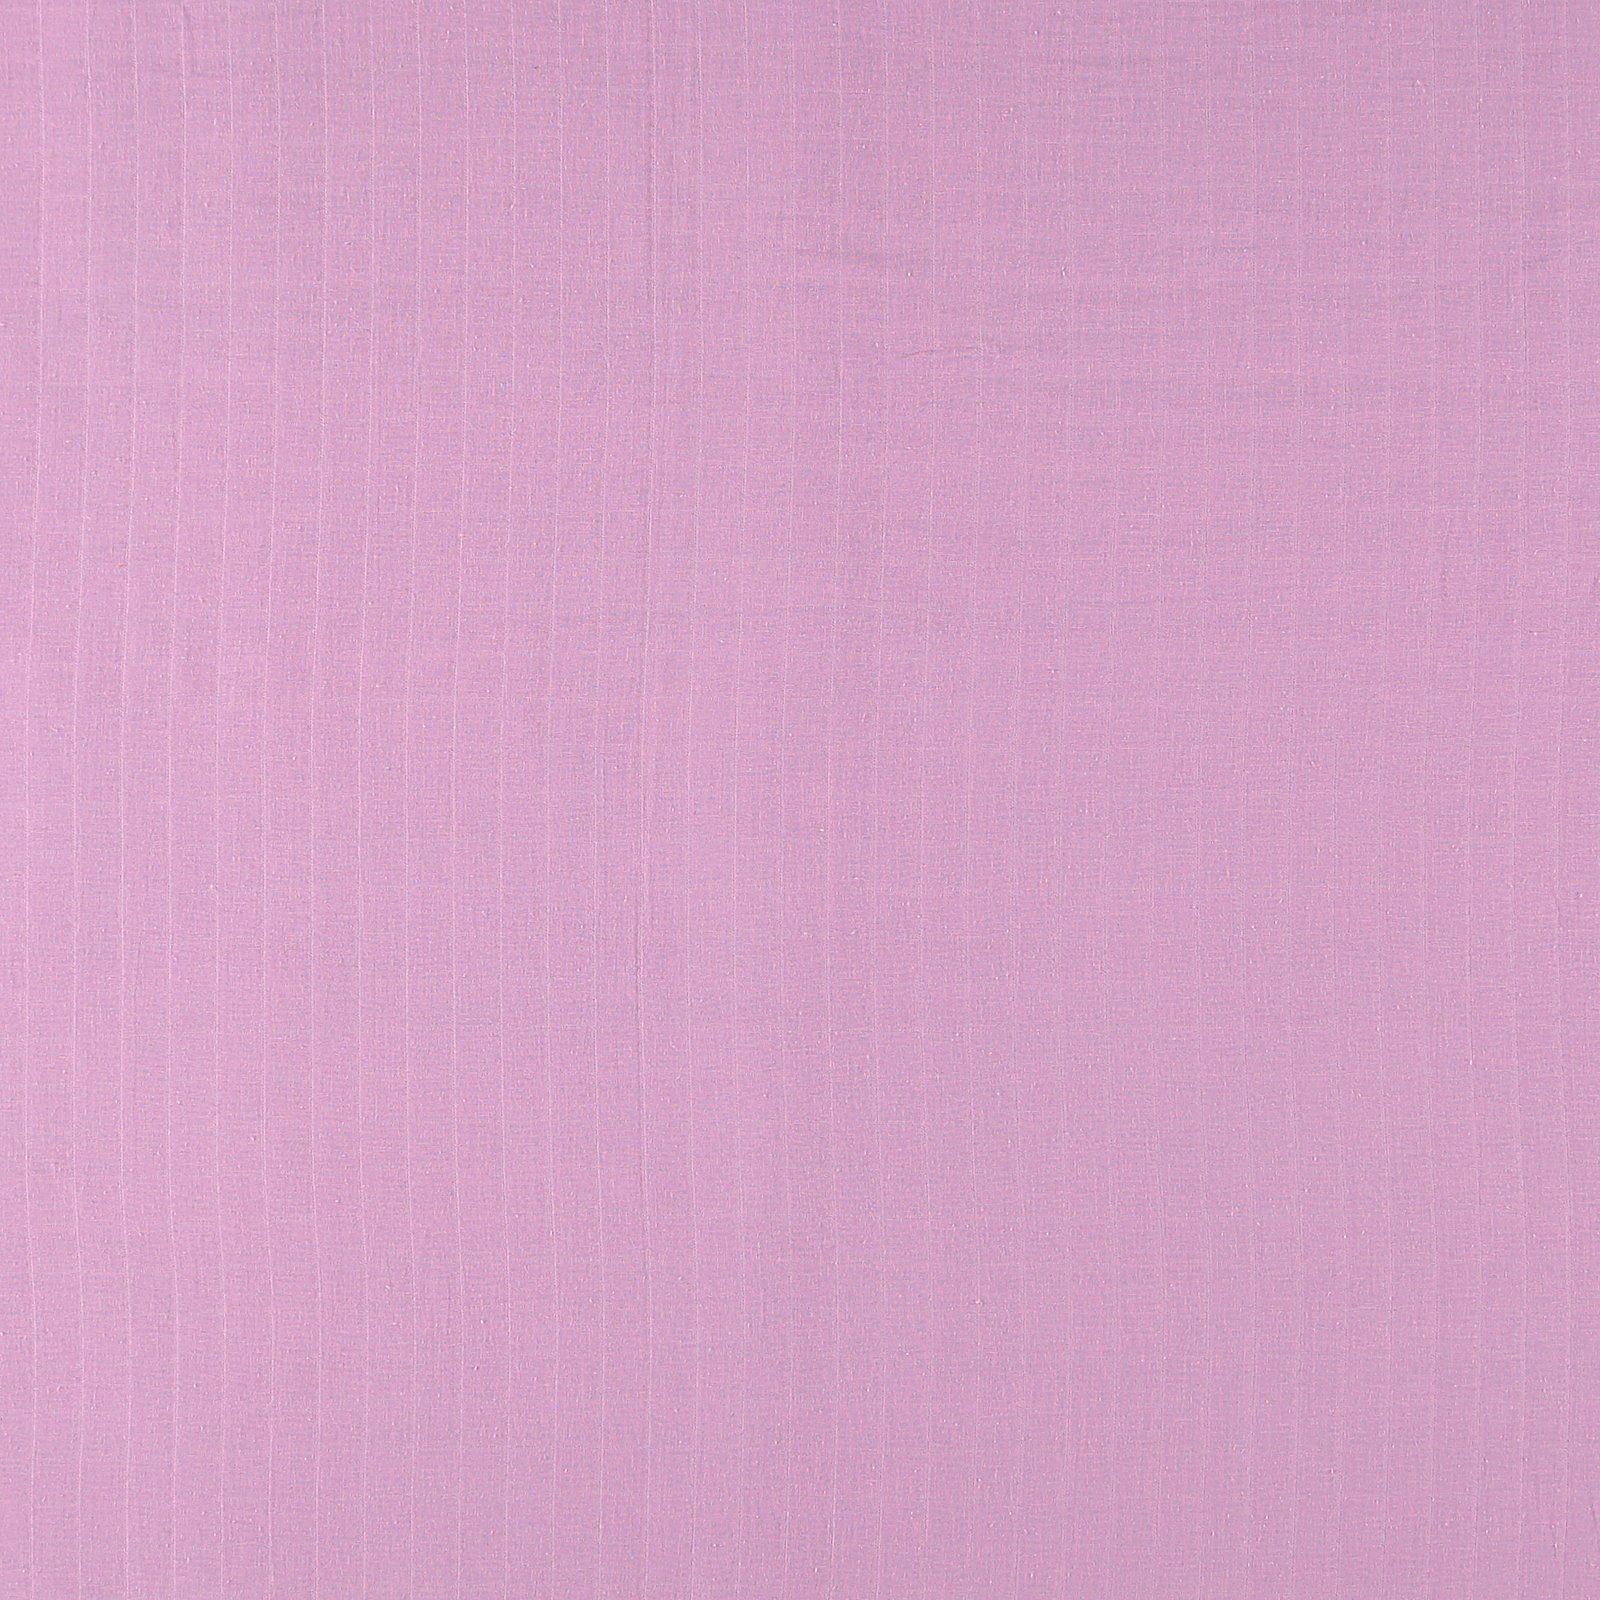 Muslin 2-layers bright lavender 501825_pack_sp